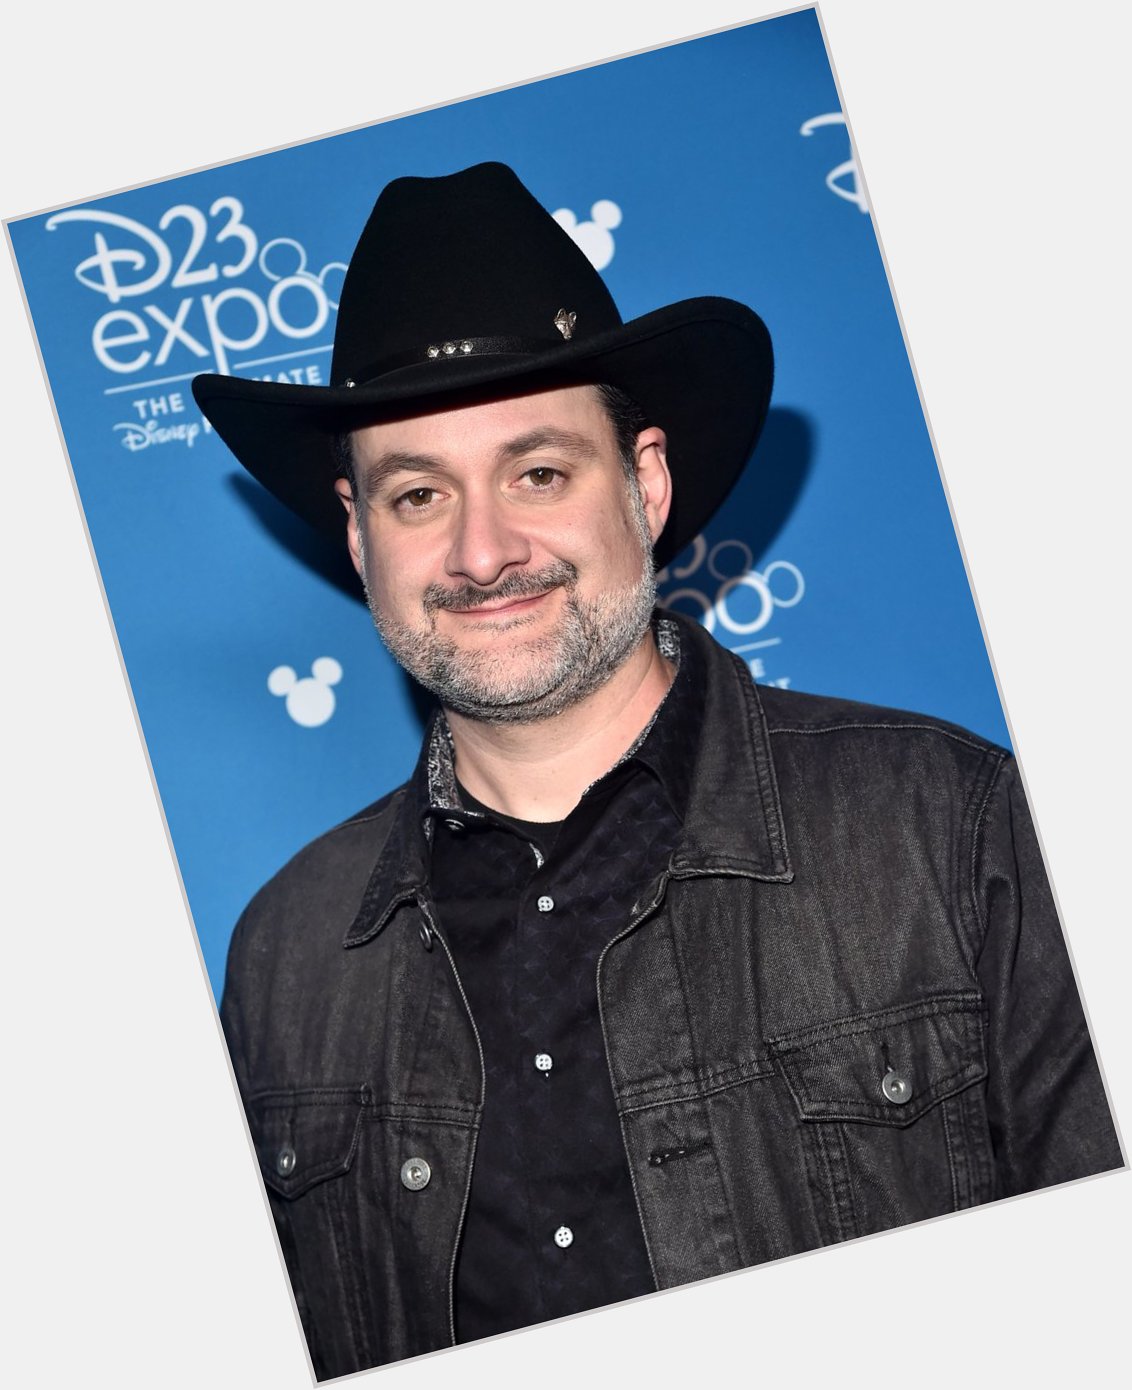 Happy birthday to a Dave Filoni for giving us Rebels and Clone wars and making me fall in love with them! 